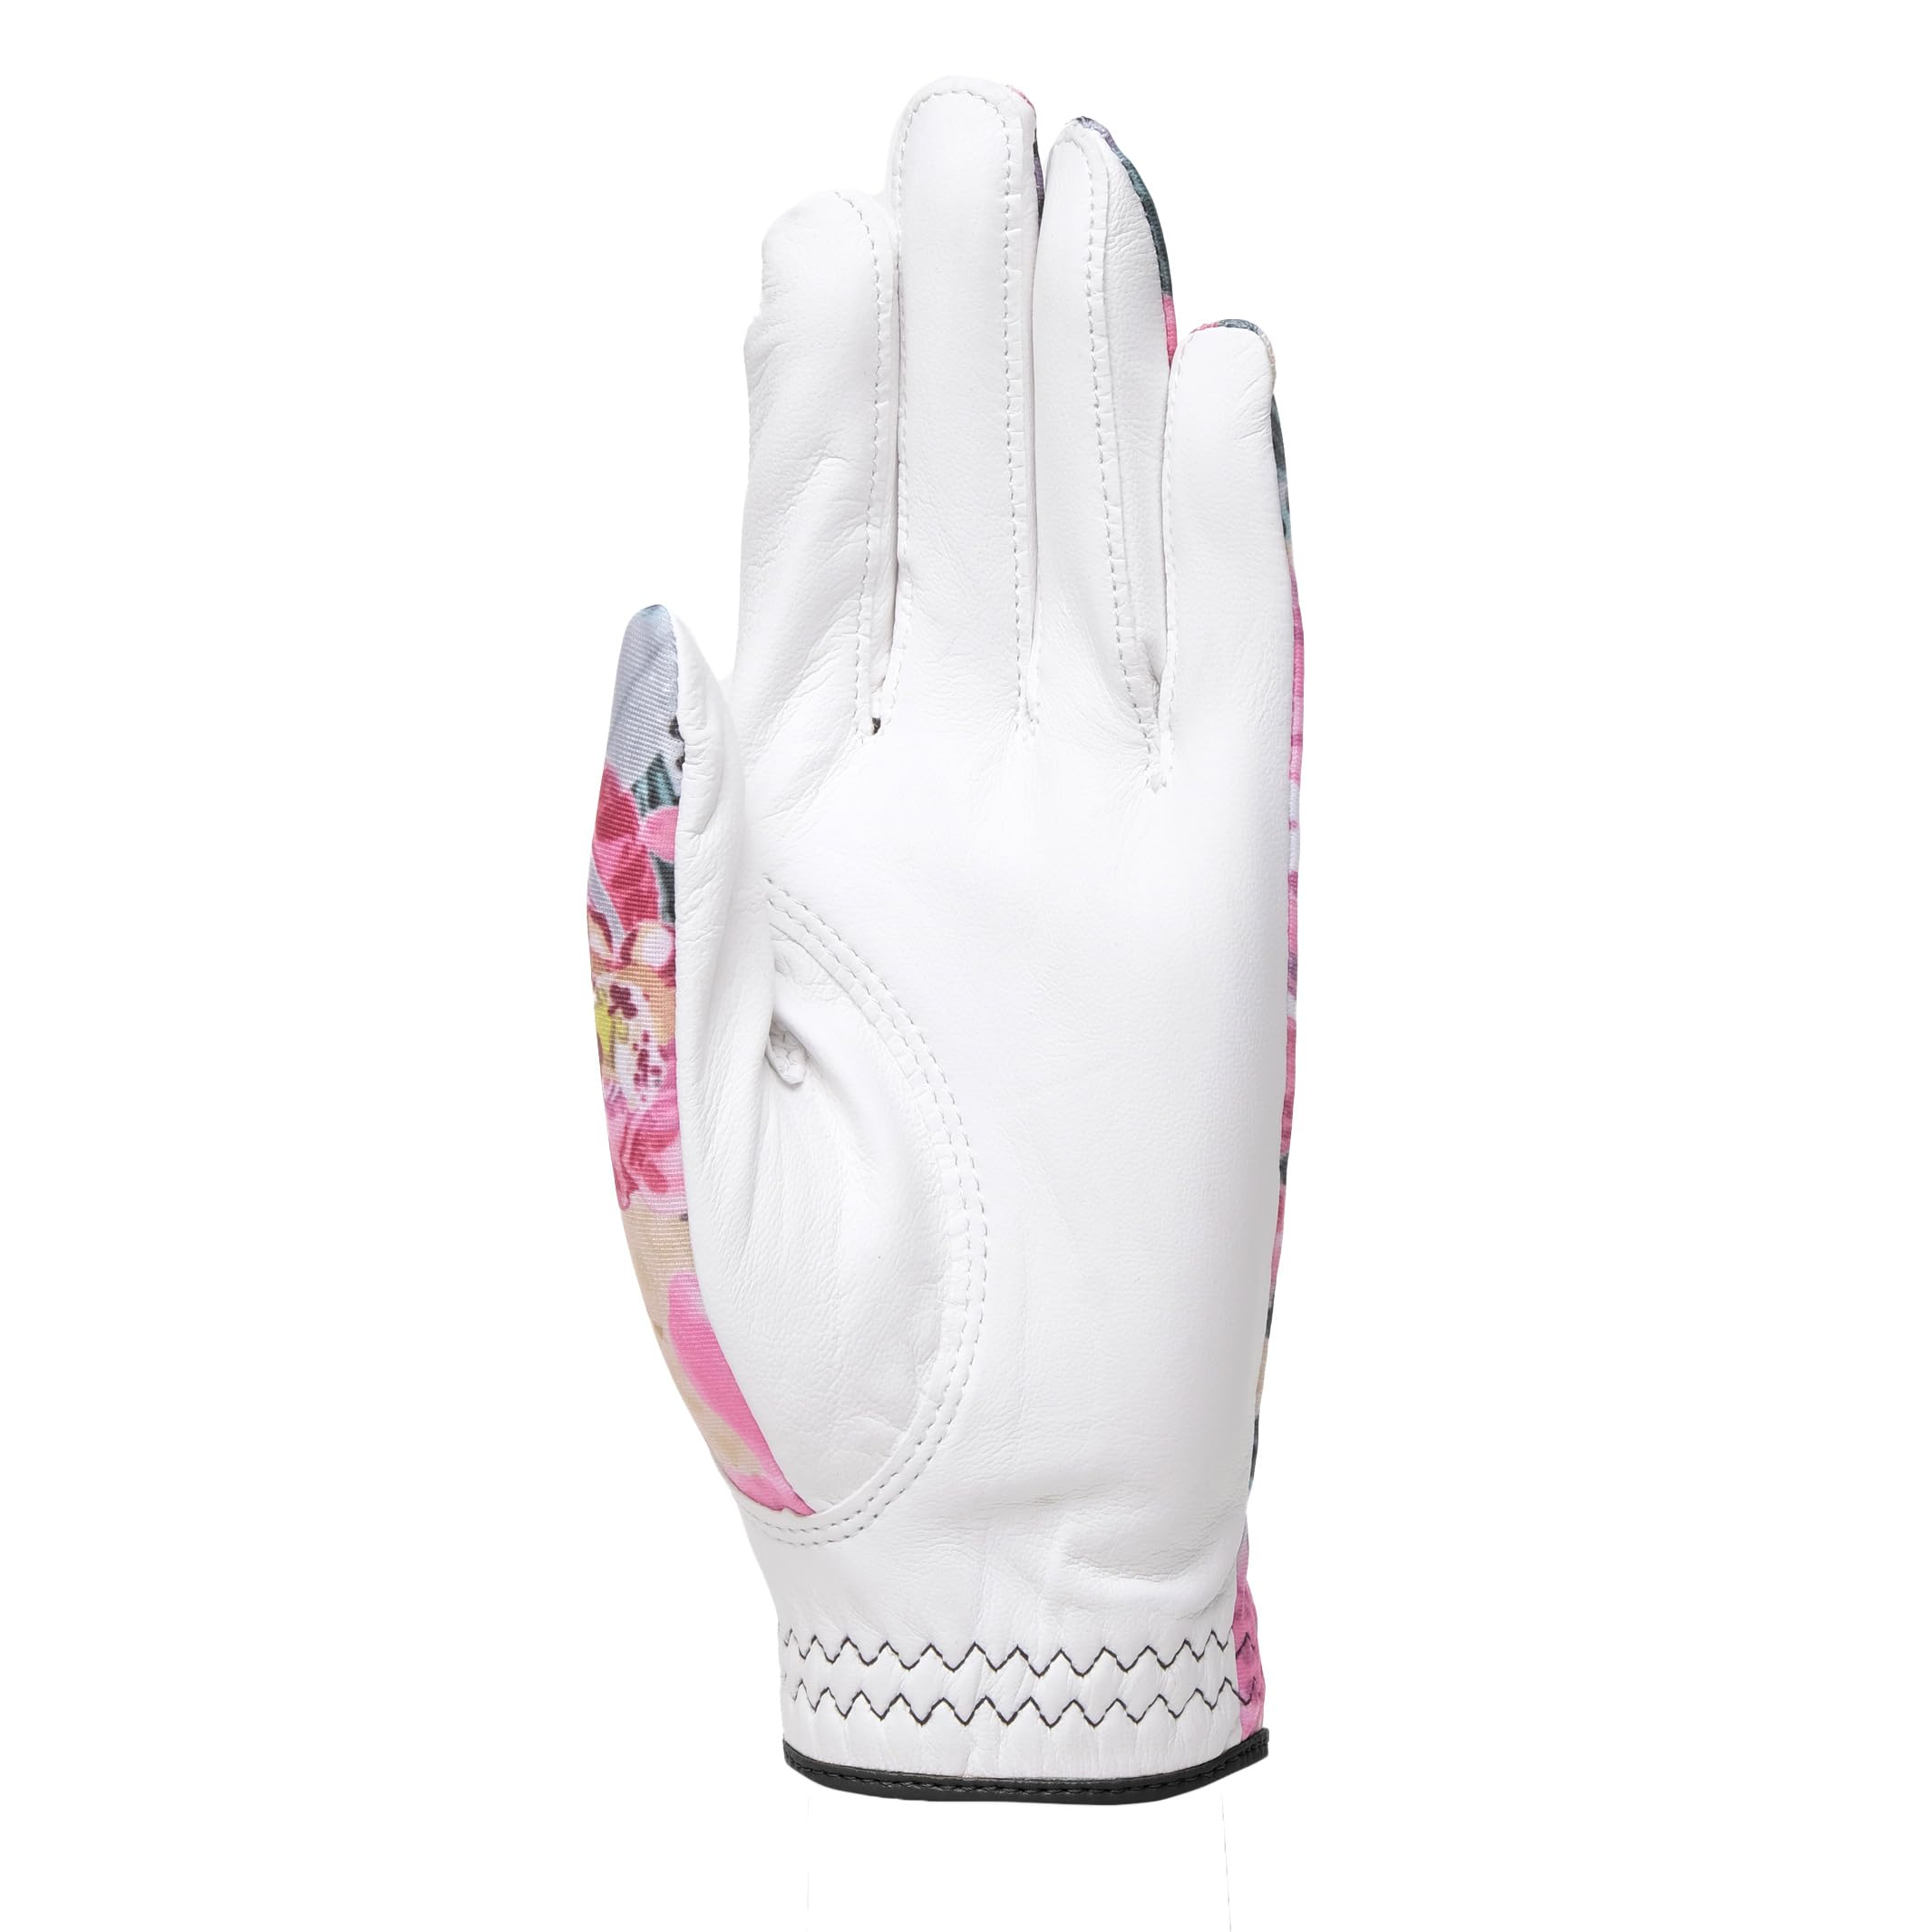 Glove It Ladies Golf Glove - Lightweight and Soft Cabretta Leather Golf Glove for Womens, Features UV Protection